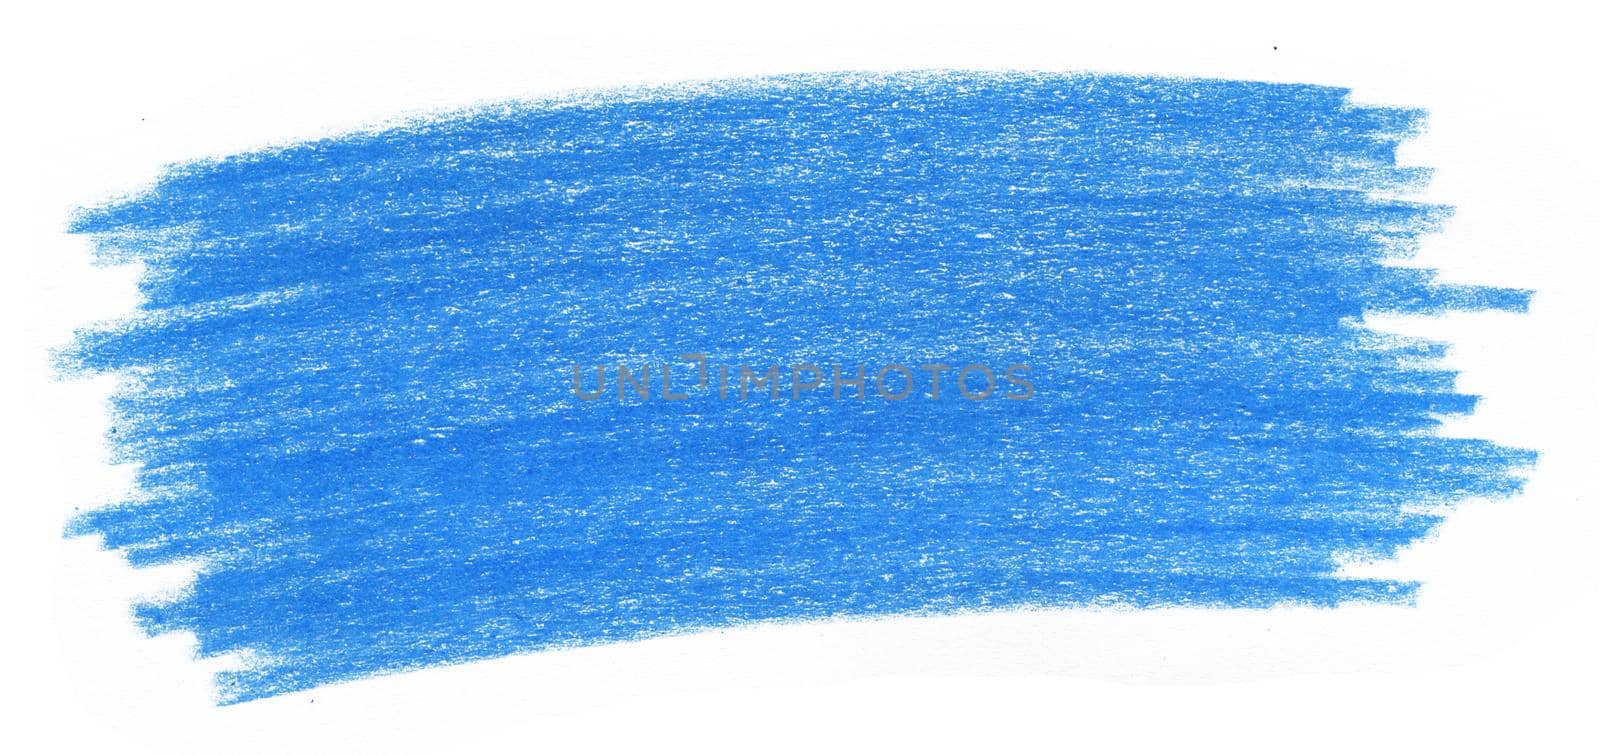 Blue Abstract Stain Drawn by Colored Pencil Isolated on White Background. Pastel Colored Spot for Decoration, Poster, Banner, Greeting Cards Design.